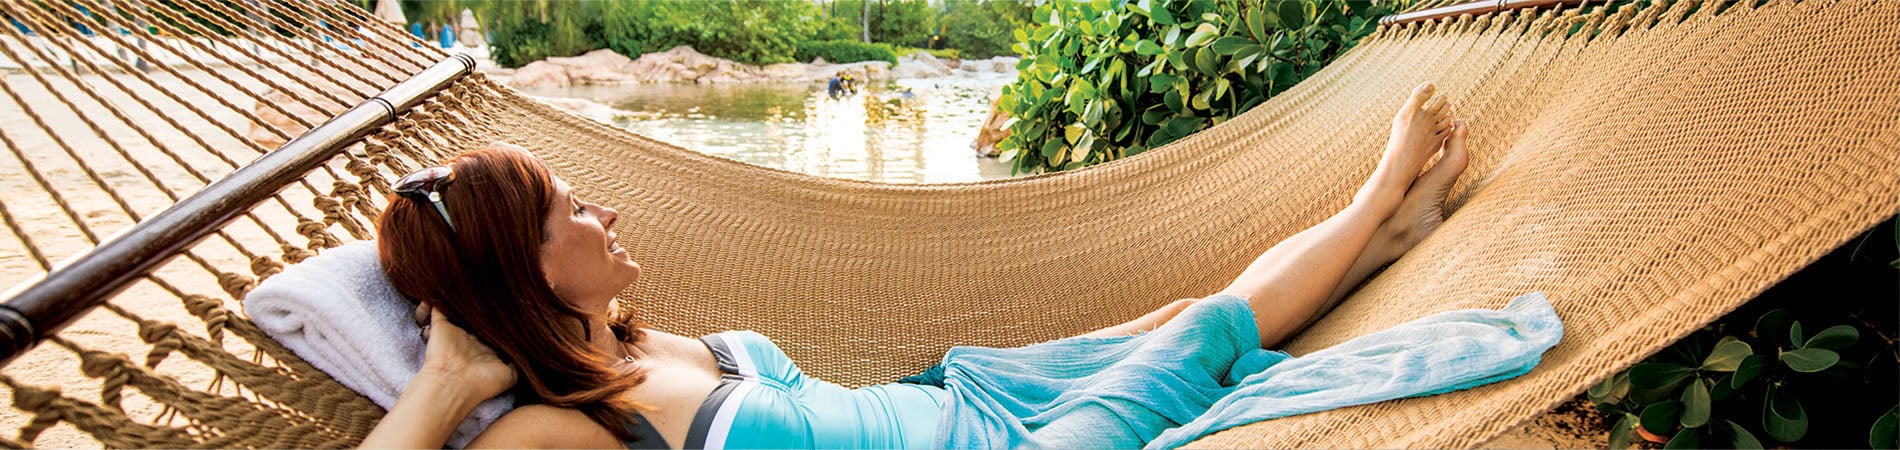 Enjoy hours of relaxation at Discovery Cove.